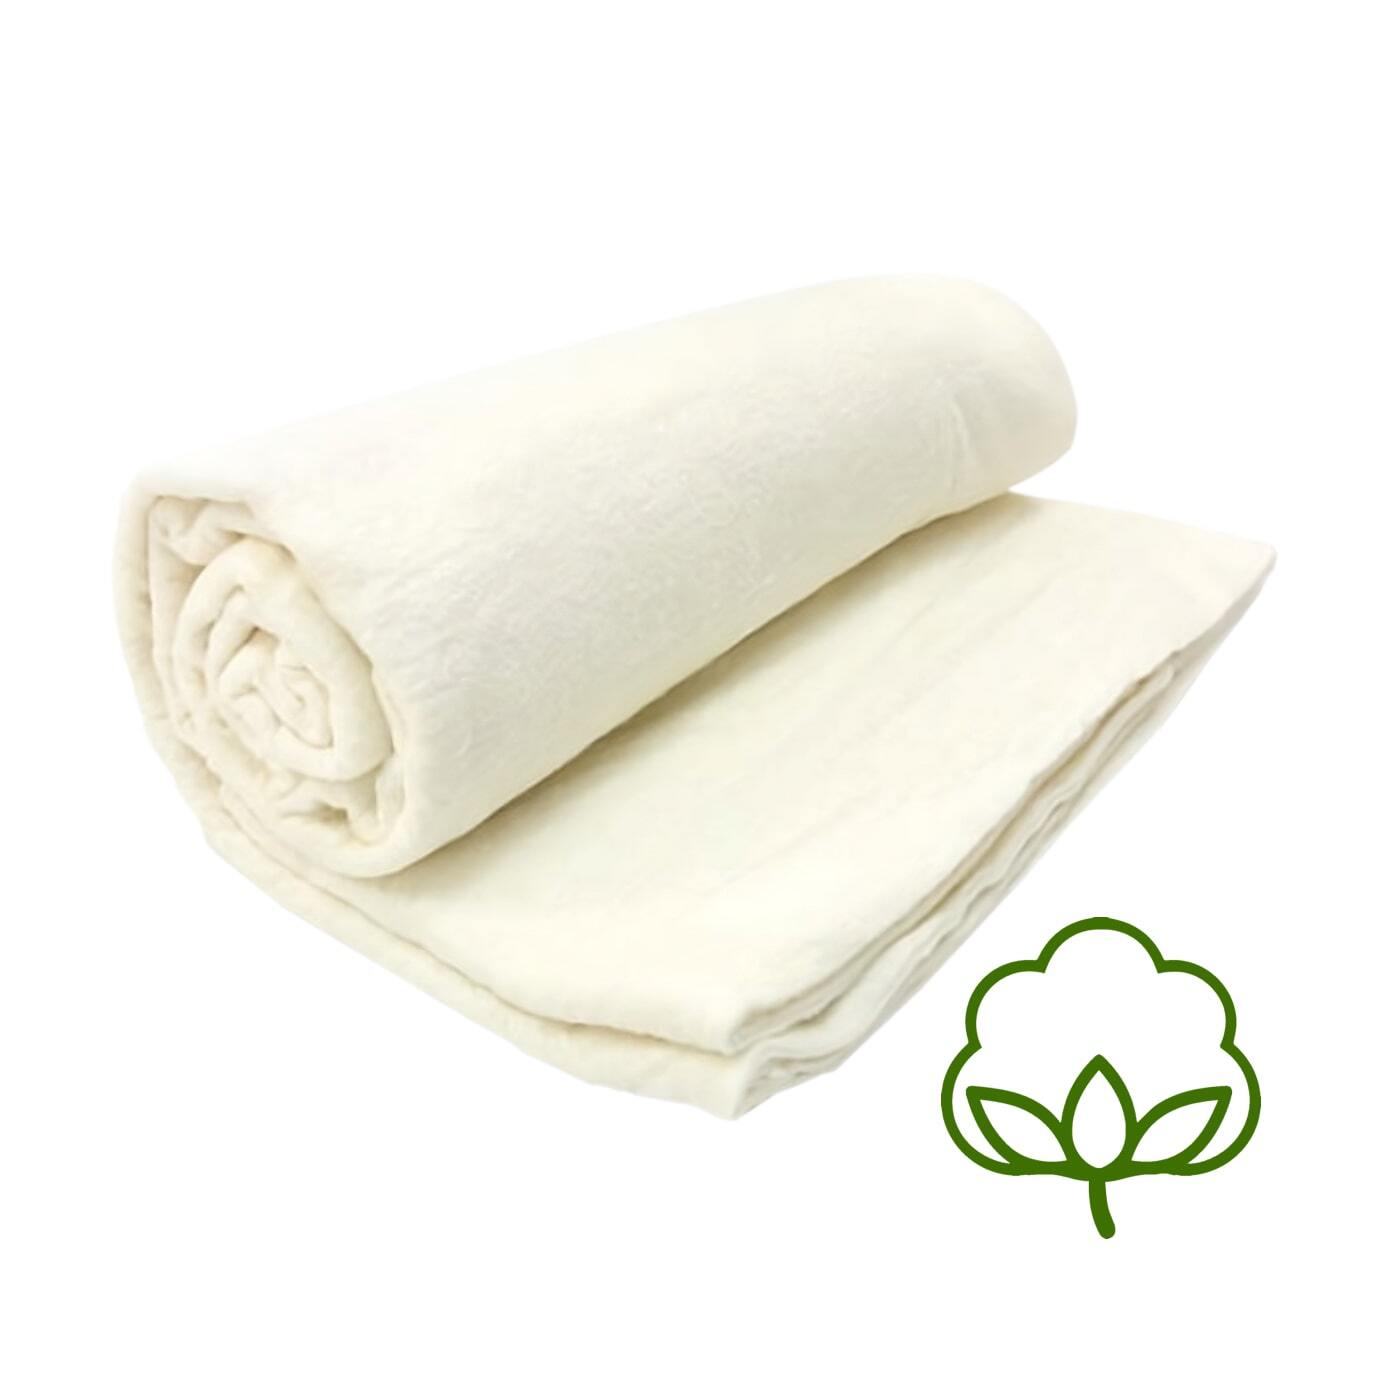 100% Cotton Wadding for Quilting, Needled Cotton Batting, Natural Cotton  Wadding, Scrim, Quality Fabric, Half Meter, Metre UK Seller 